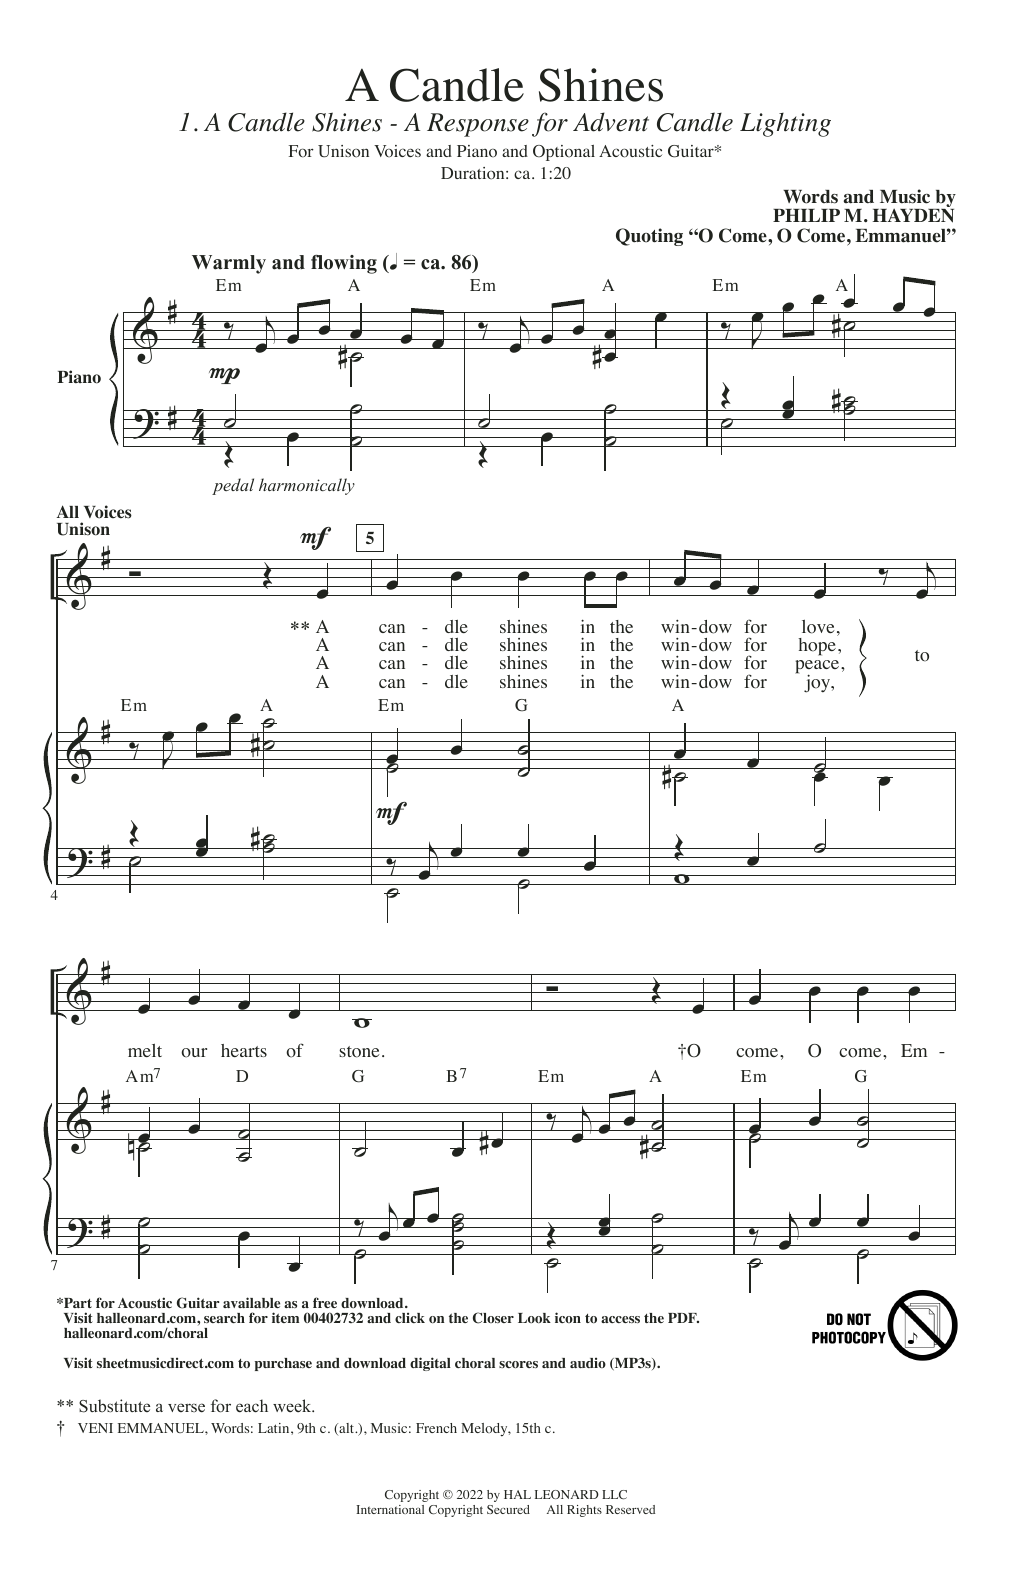 Download Philip M. Hayden A Candle Shines (A Response For Advent Sheet Music